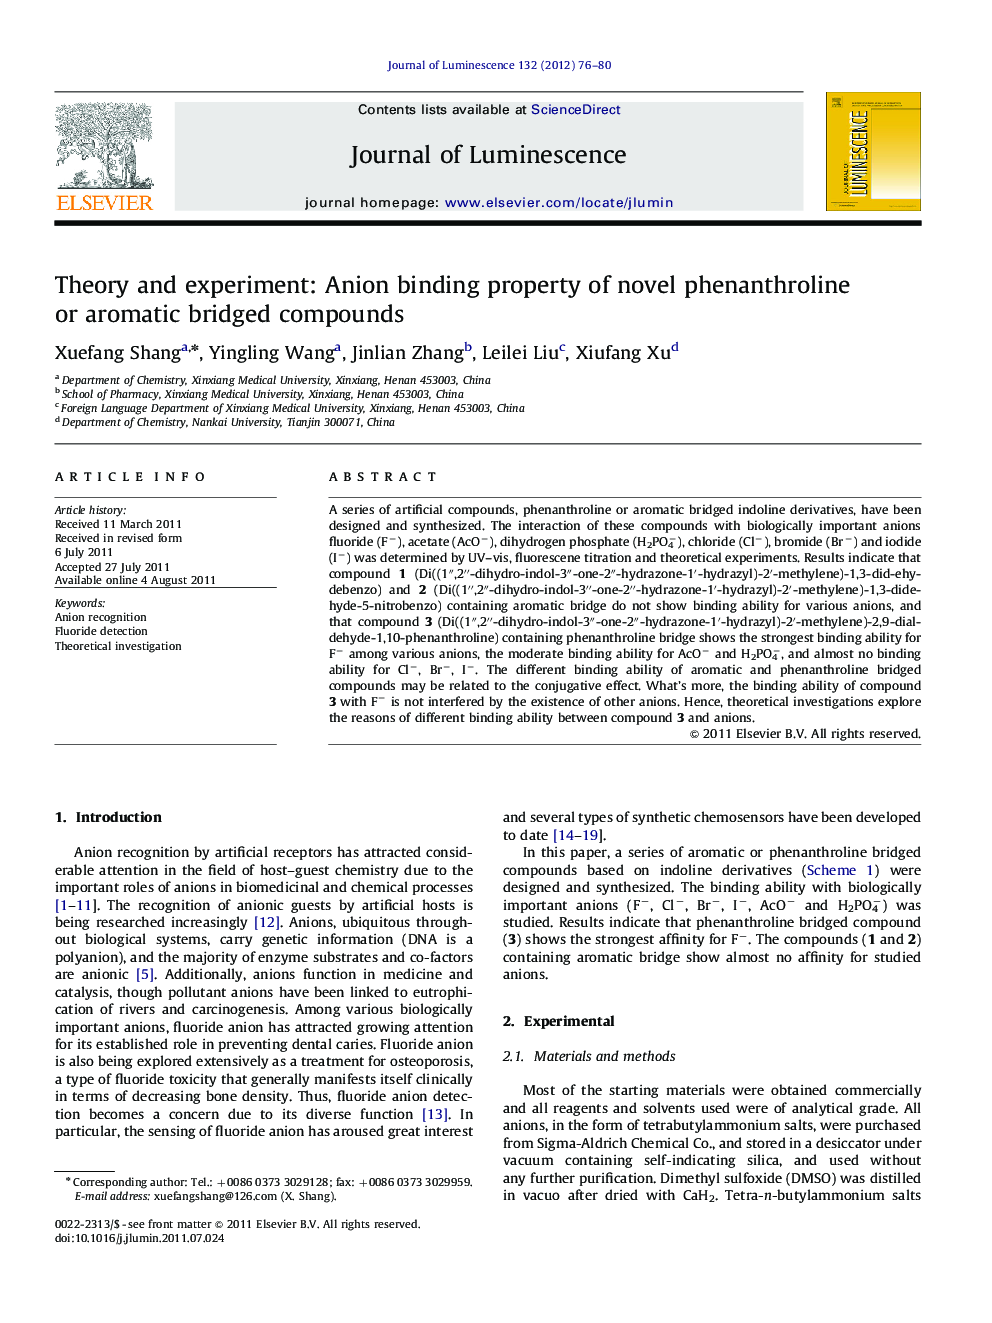 Theory and experiment: Anion binding property of novel phenanthroline or aromatic bridged compounds